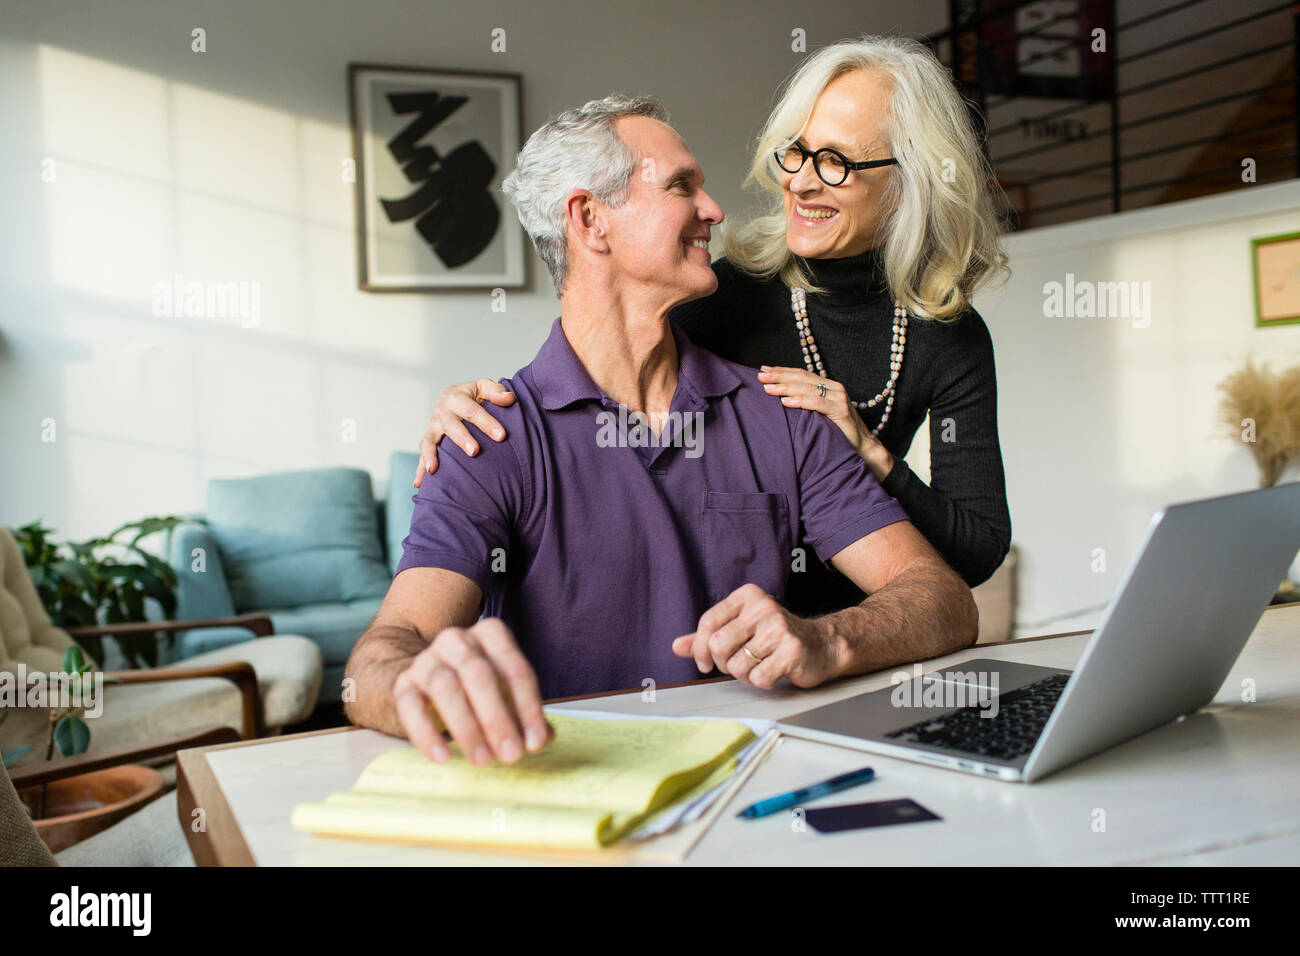 Smiling couple looking each other face to face while using laptop computer at home Stock Photo